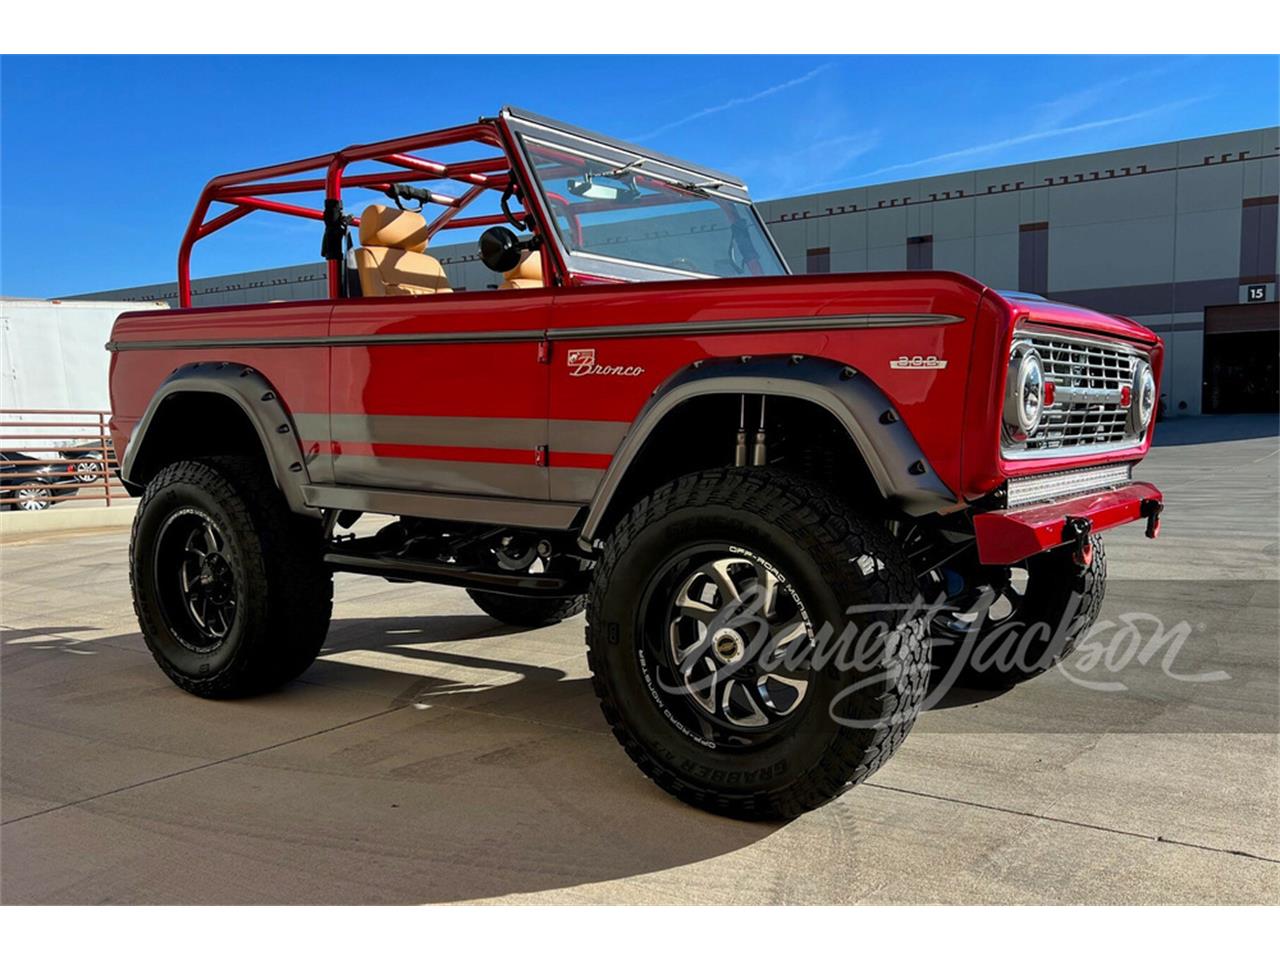 For Sale at Auction: 1975 Ford Bronco in Scottsdale, Arizona for sale in Scottsdale, AZ